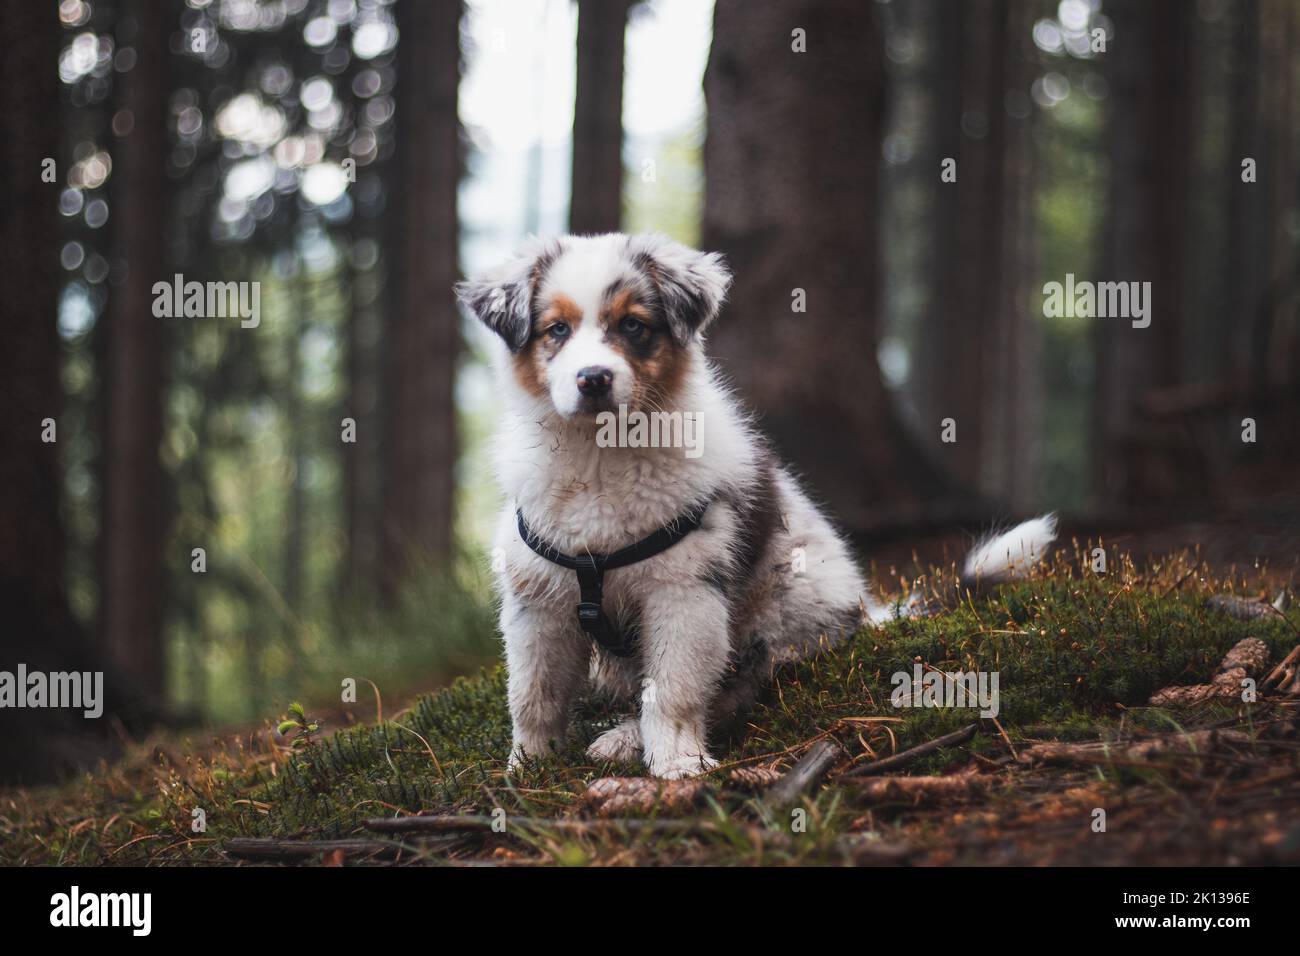 Adorable Blue merle puppy, Australian Shepherd discovering new smells in a beautiful forest. Colorful shaggy dog puppy in the morning forest. Stock Photo